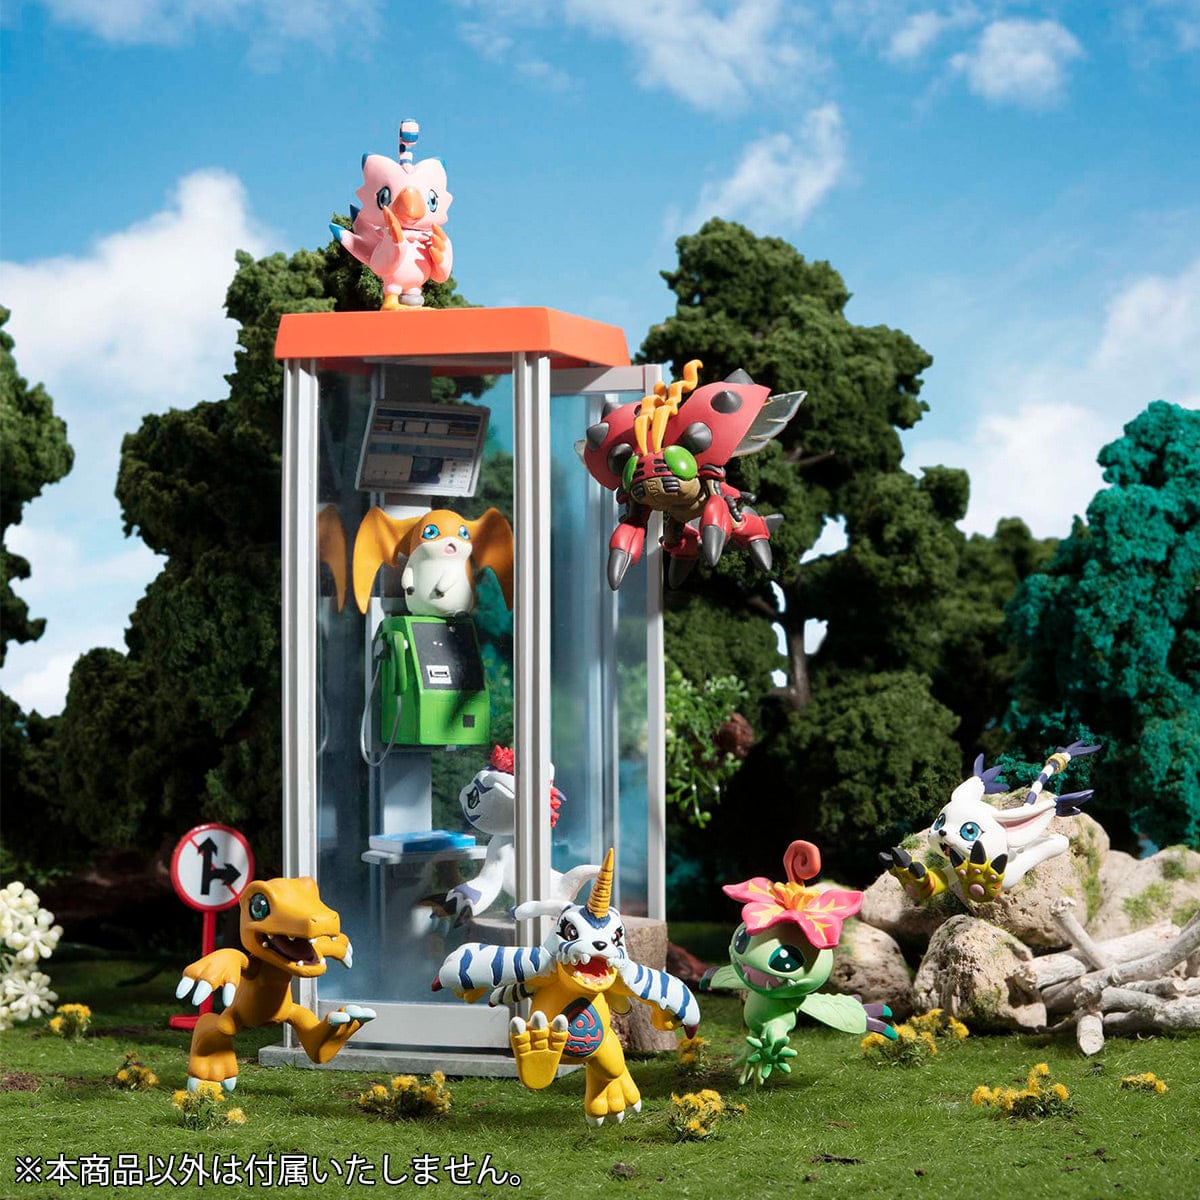 Megahouse DIGIMON ADVENTURE DIGICOLLE MIX SET【with gift】